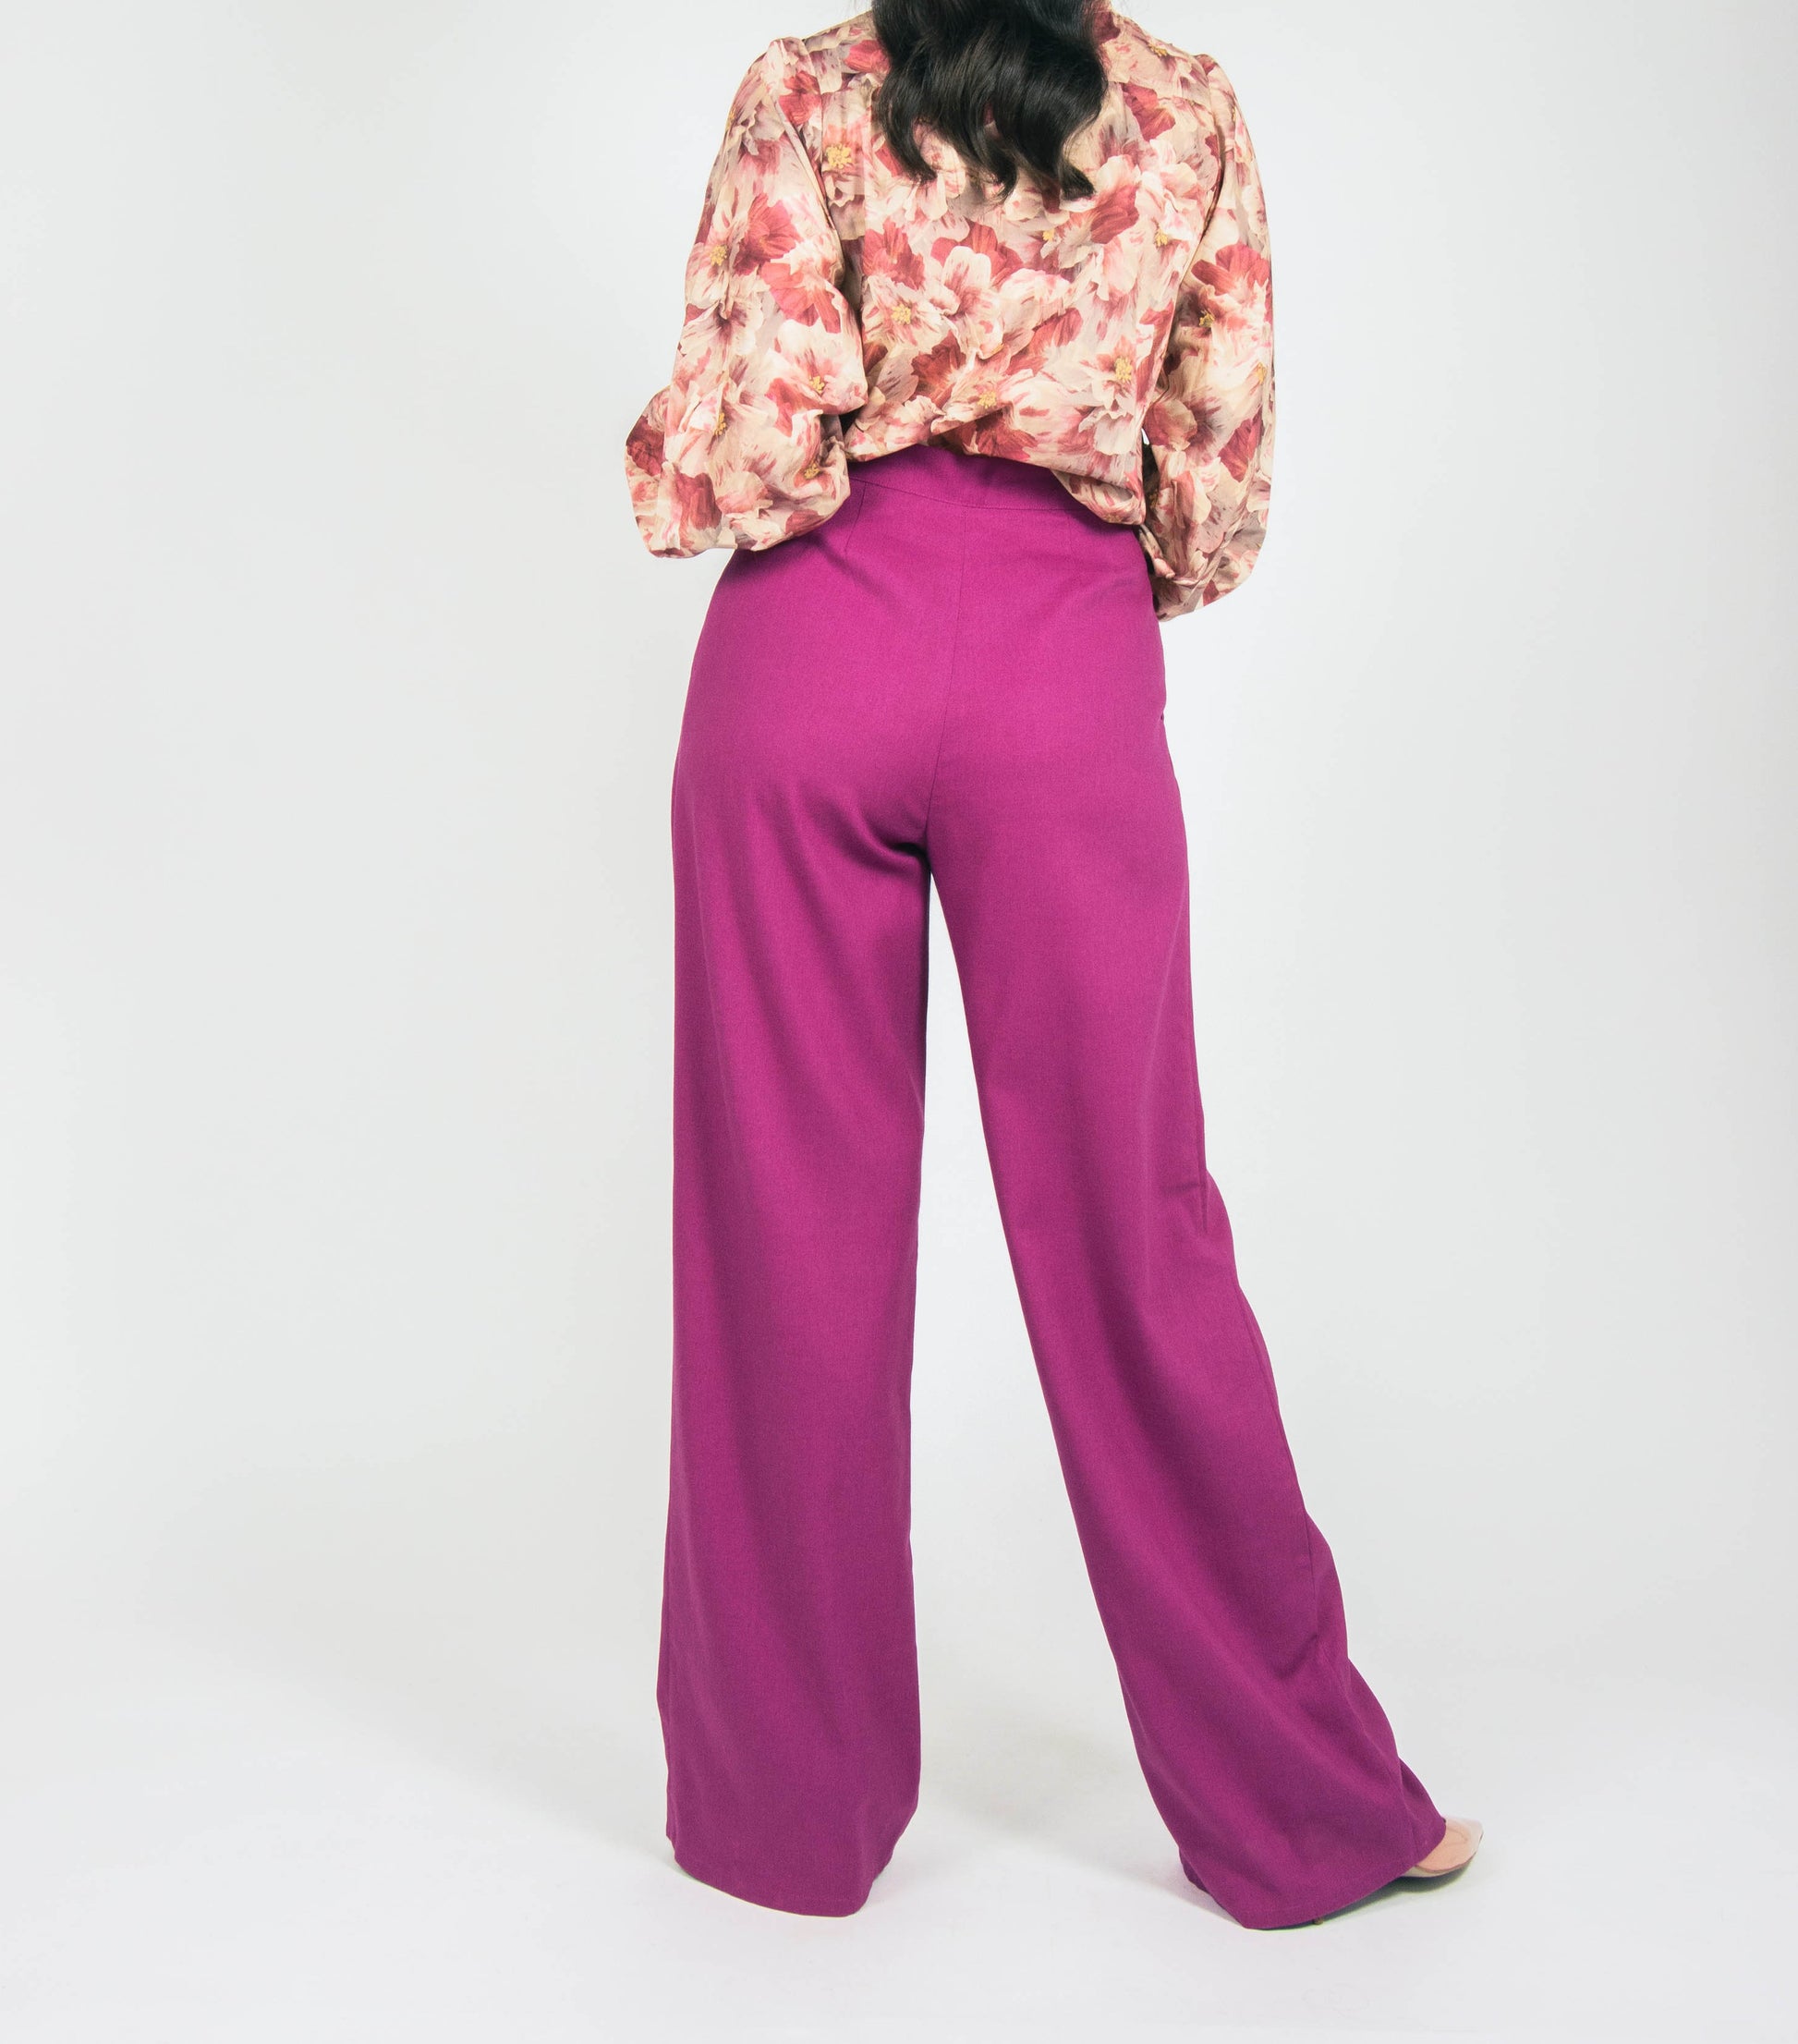 vintage style fashion made with cotton and plum wide leg trousers 